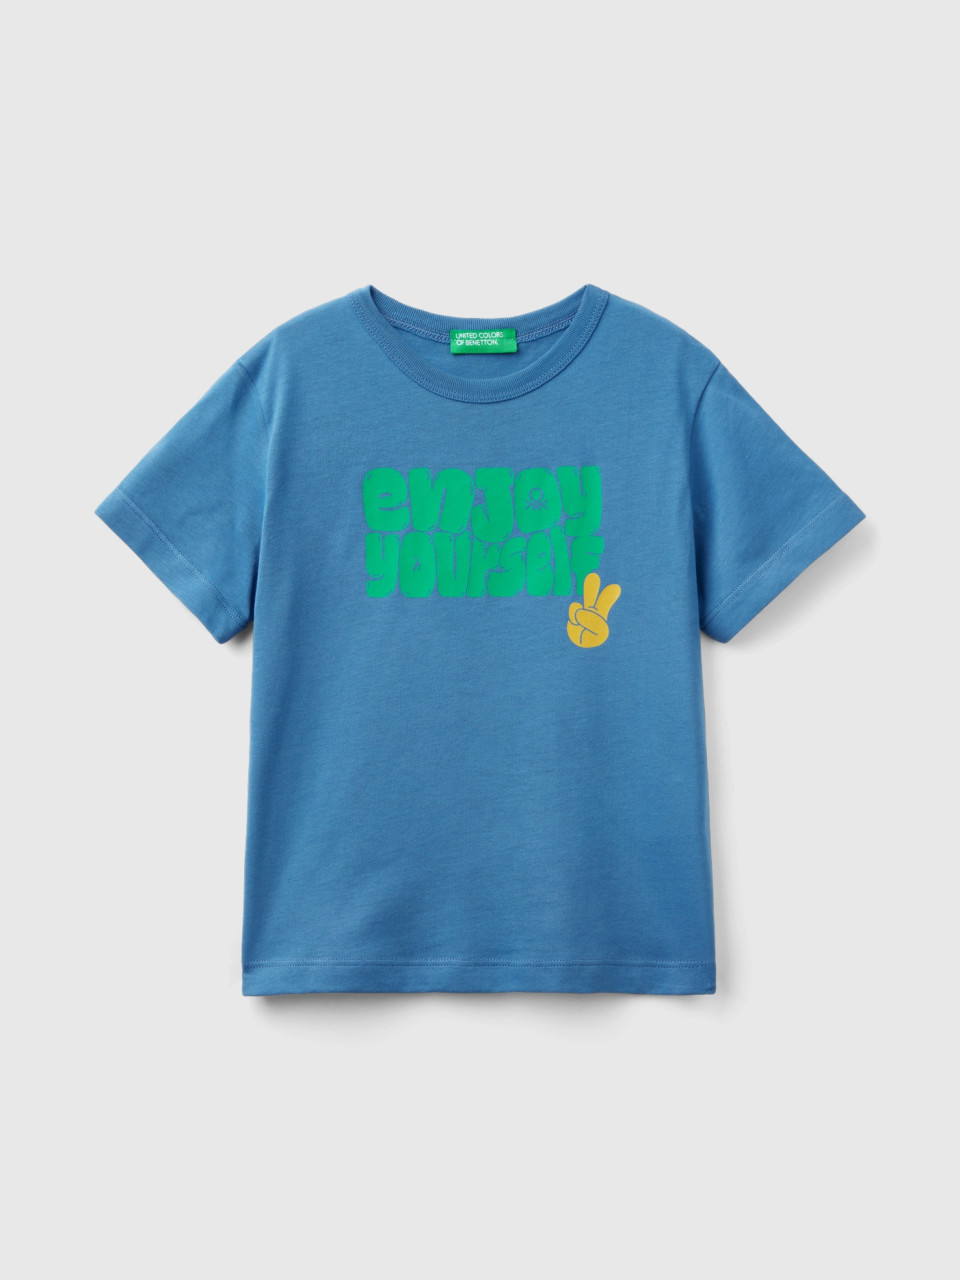 Benetton, T-shirt In Organic Cotton With Print, Blue, Kids